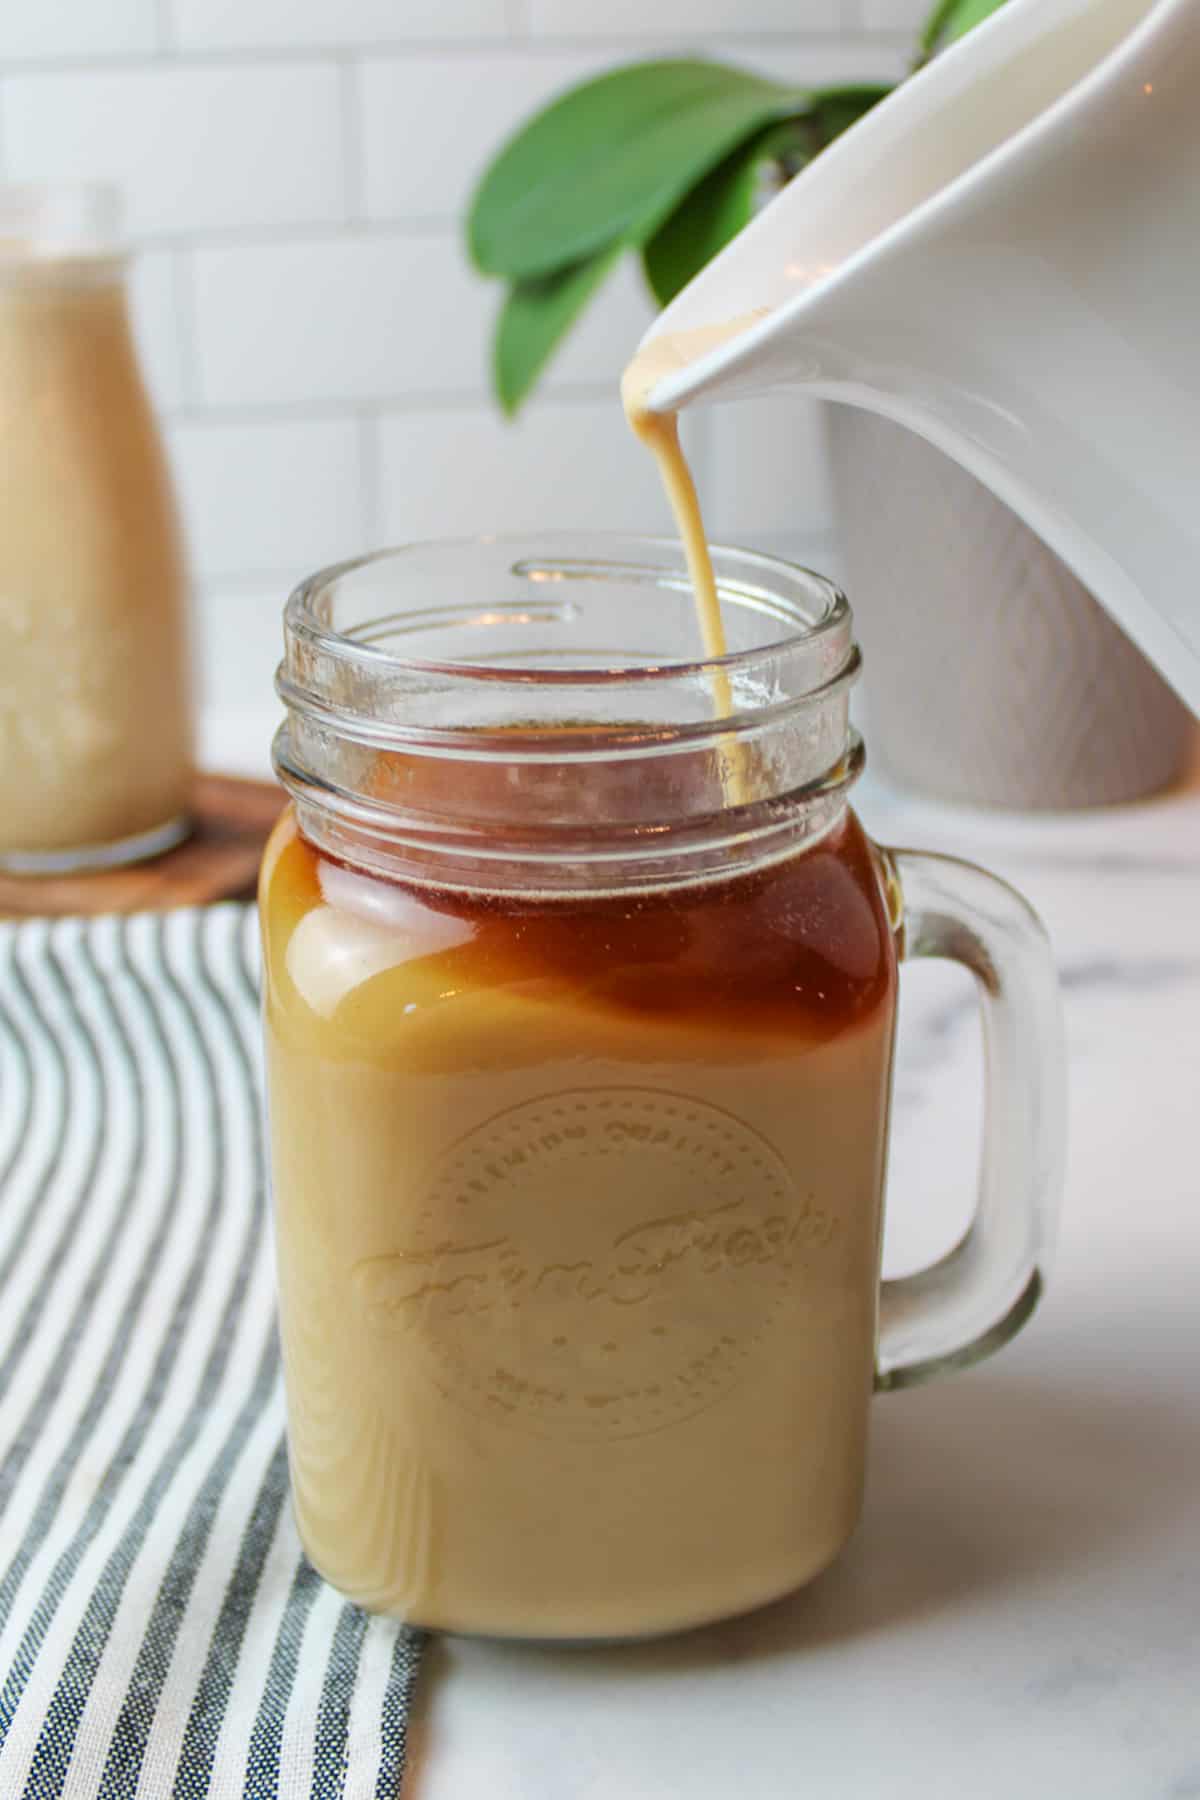 pumpkin creamer pouring into a glass of coffee